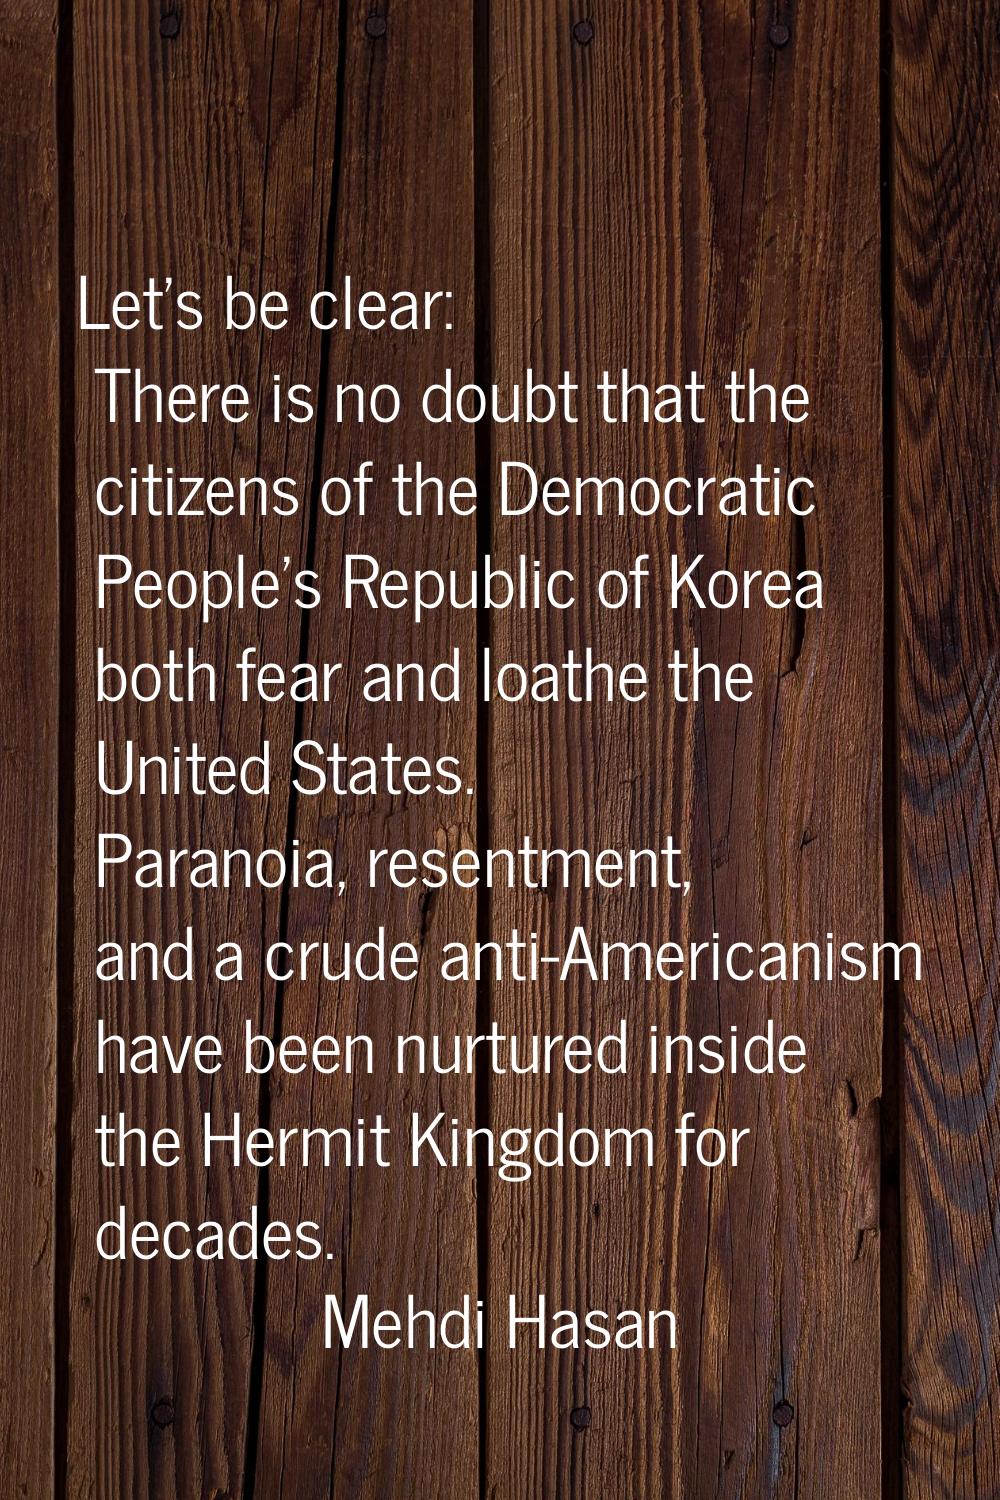 Let's be clear: There is no doubt that the citizens of the Democratic People's Republic of Korea bo